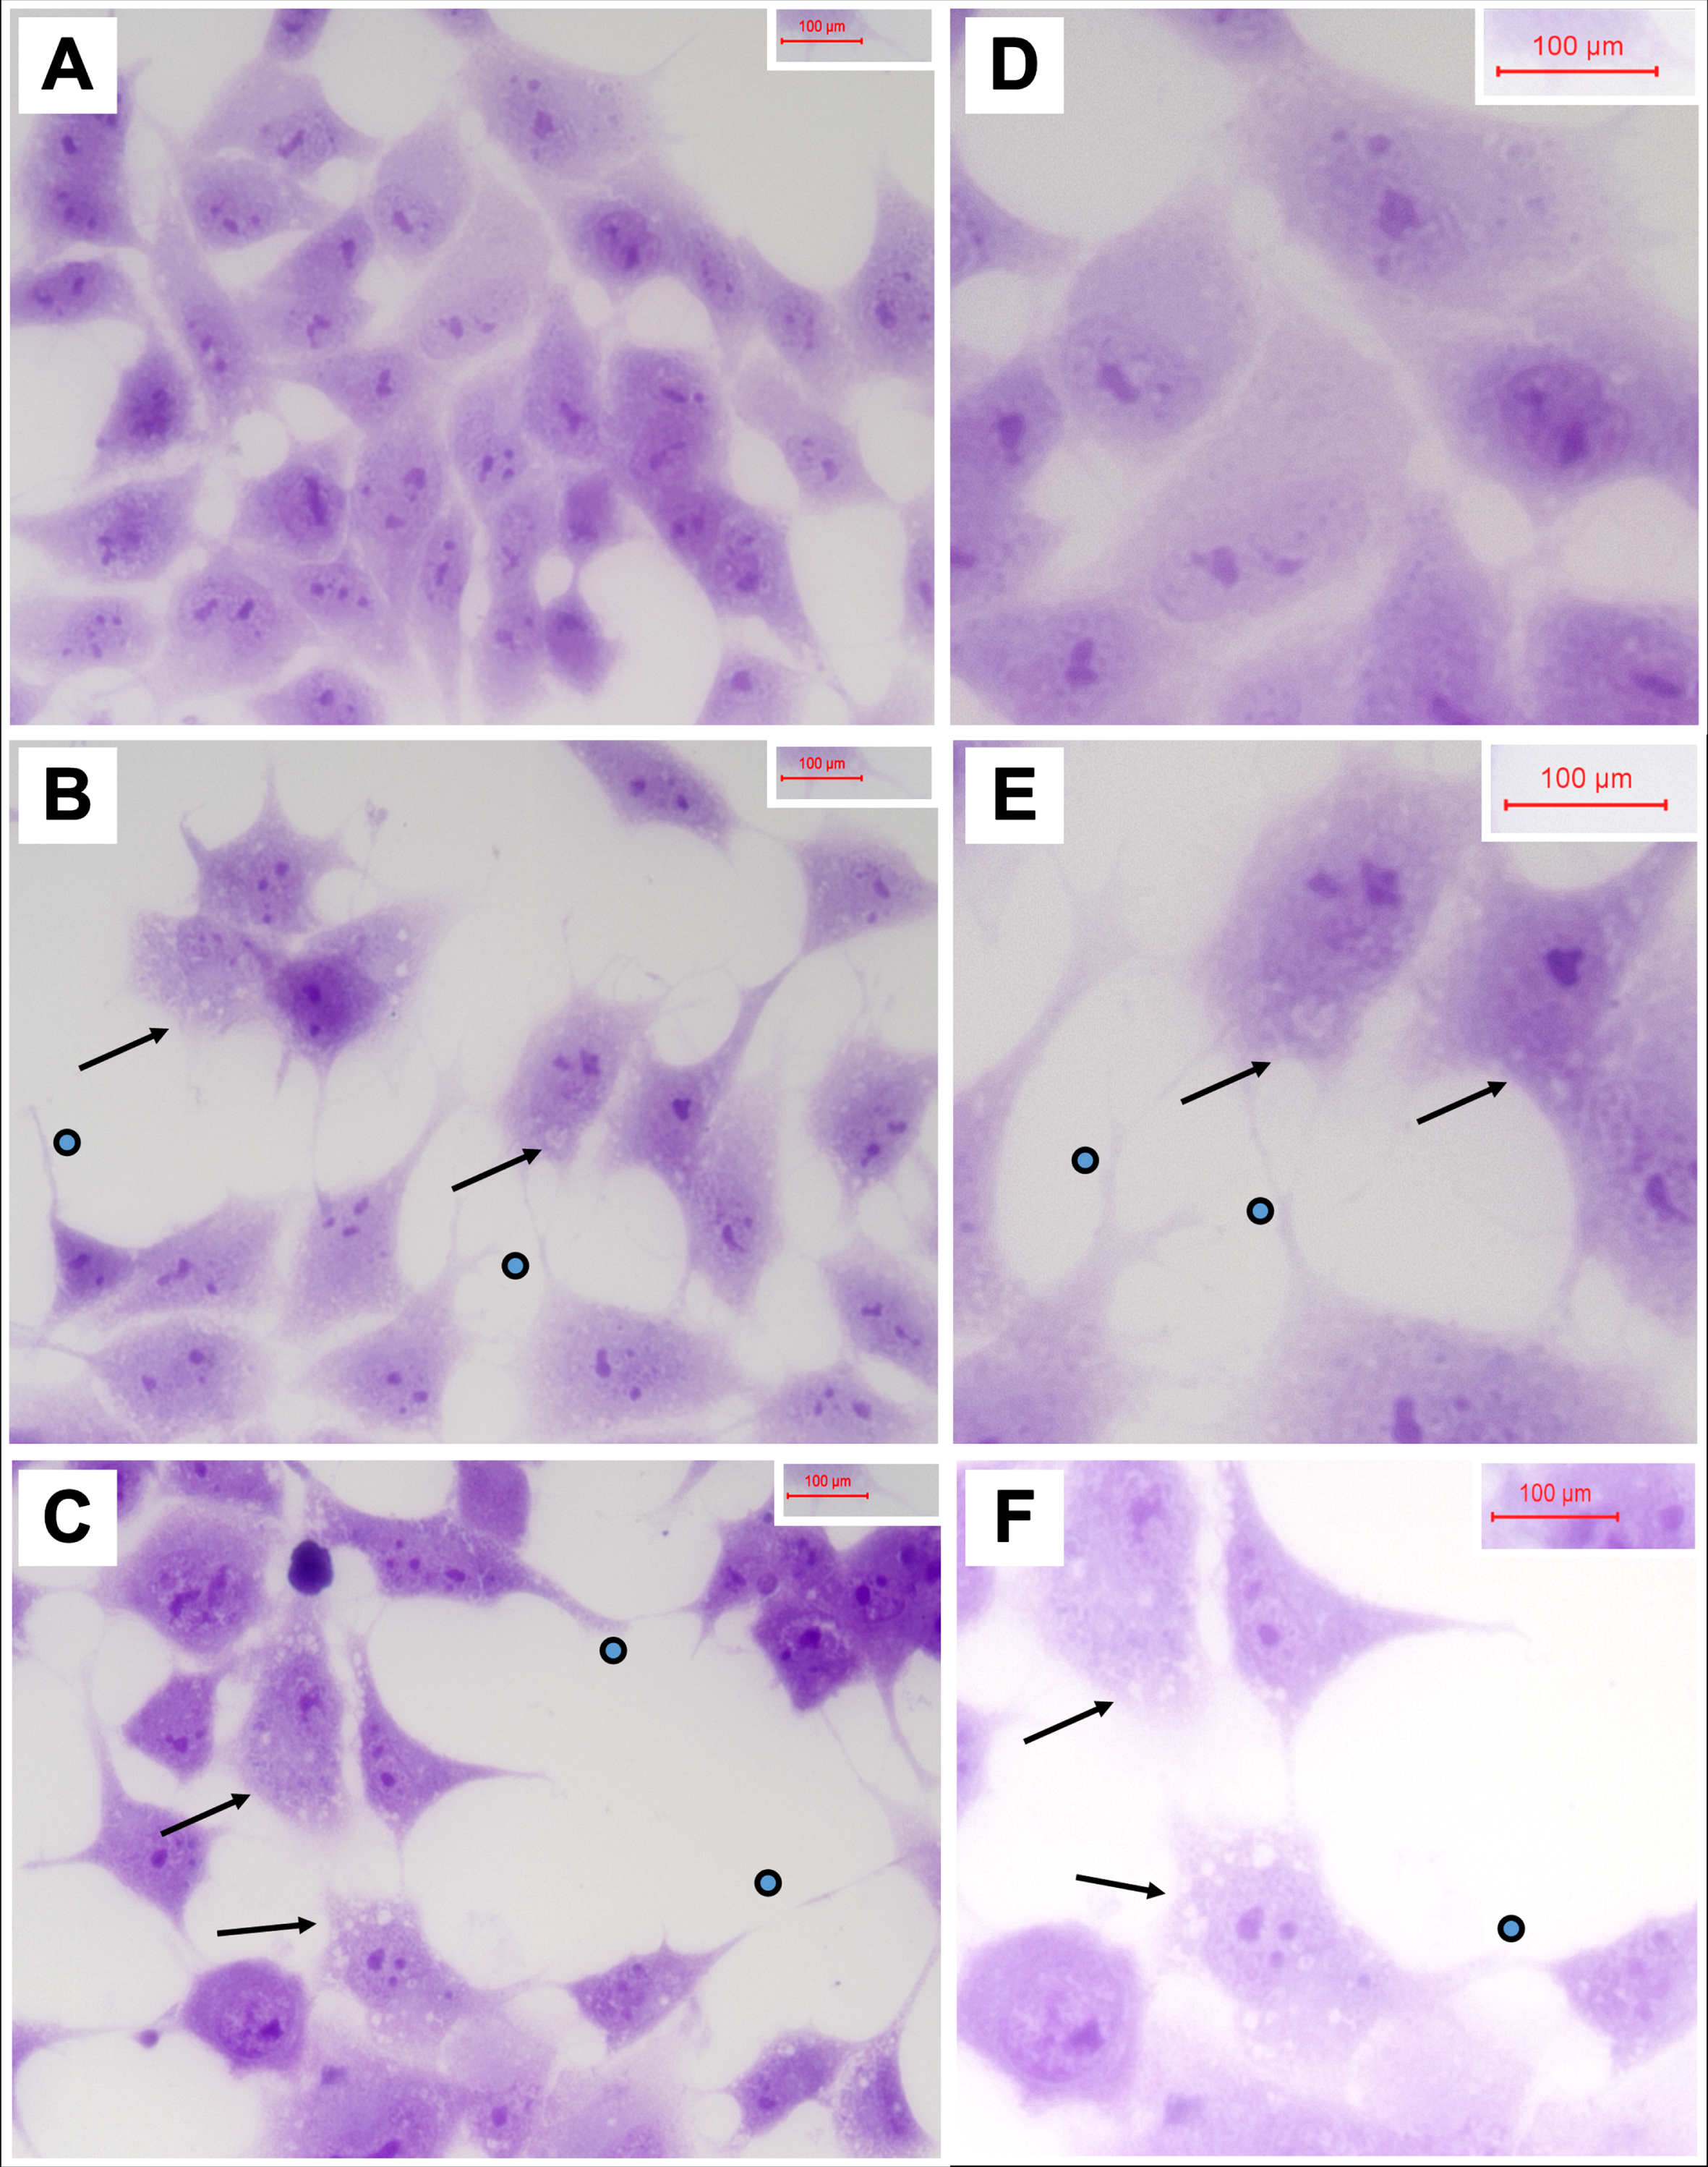 Degenerative cytomorphological effects of 2,4-D and 2,4,5-T. PNET2 cells seeded into 8-well chamber slides were treated with A, D) vehicle, B, E) 250μg/ml 2,4-D, or C, F) 250μg/ml 2,4,5-T for 48 h. Cells were stained with Hematoxylin after 10% formalin fixation. Note lower cell densities, cytoplasmic vacuolations (arrows), and irregular cell process extensions (dots) in the 2,4-D and 2,4,5-T treated cultures. Photographs were taken at A-C) 400x and D-F) 600x. Final image magnification scale bars are displayed.